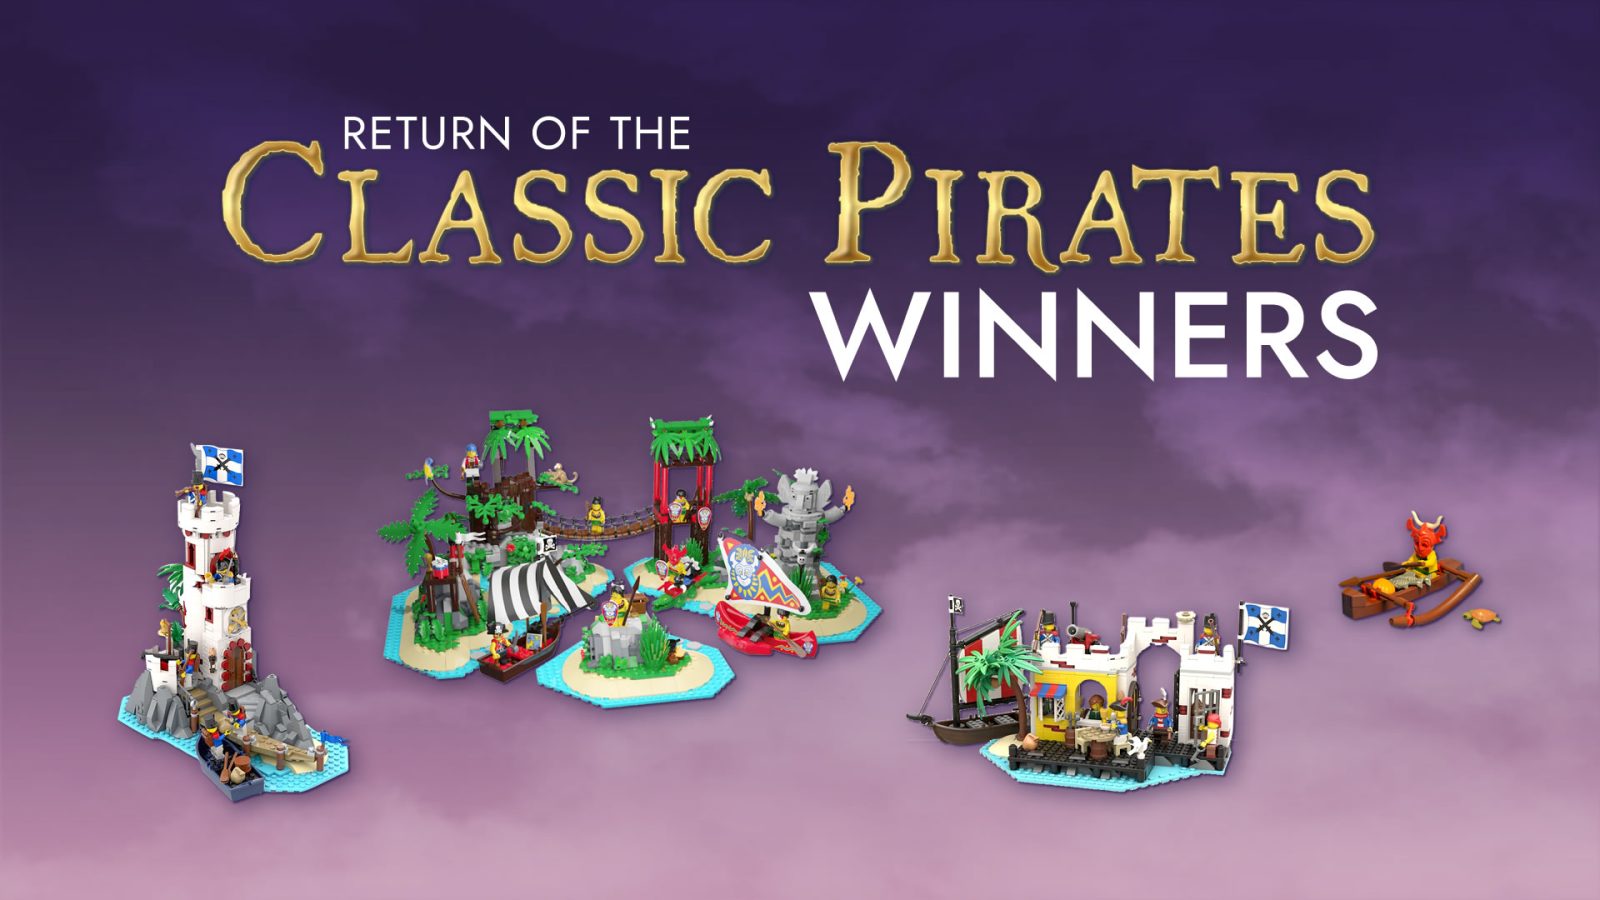 Return of the Classic-Pirates Contest Winners